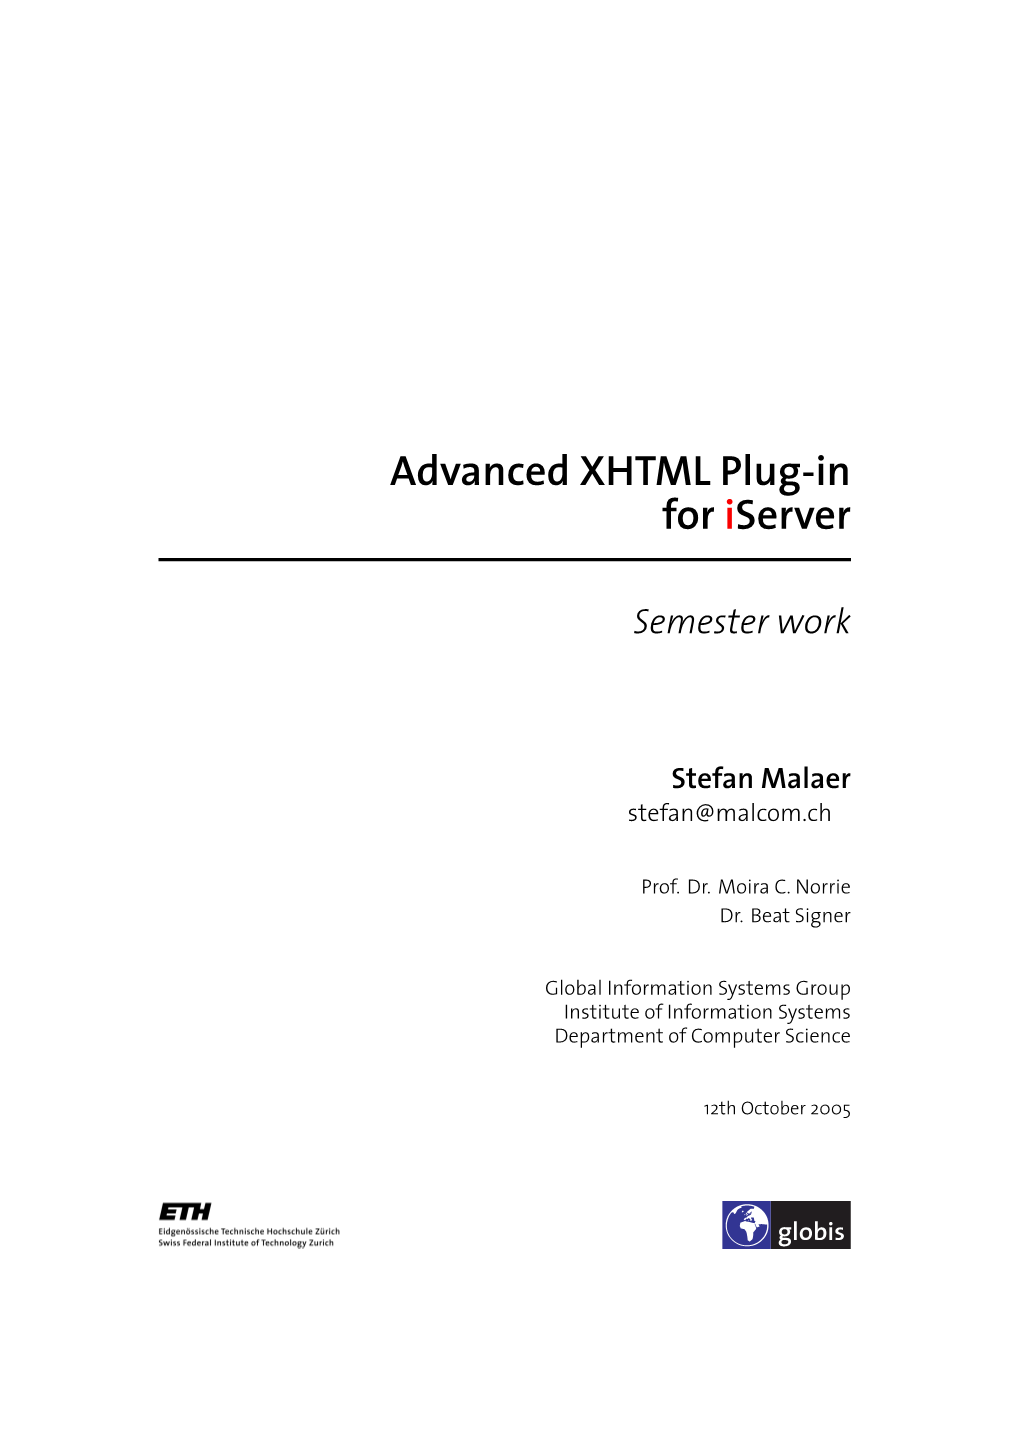 Advanced XHTML Plug-In for Iserver